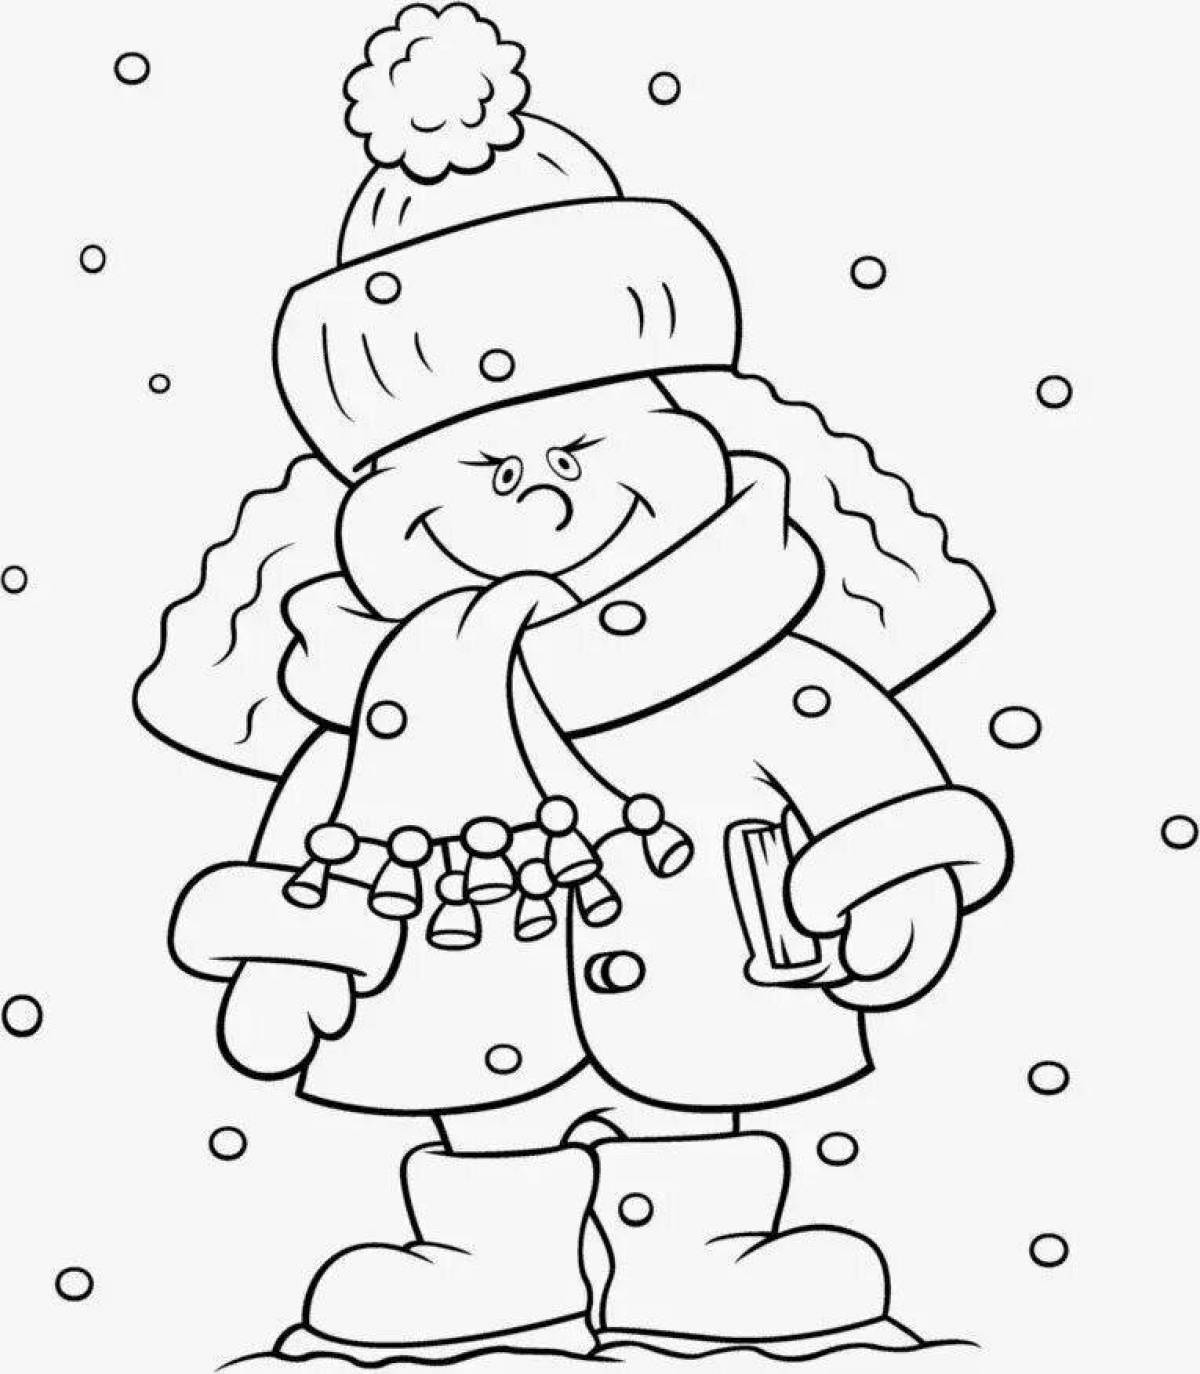 Adorable coloring book for kids boy in winter clothes